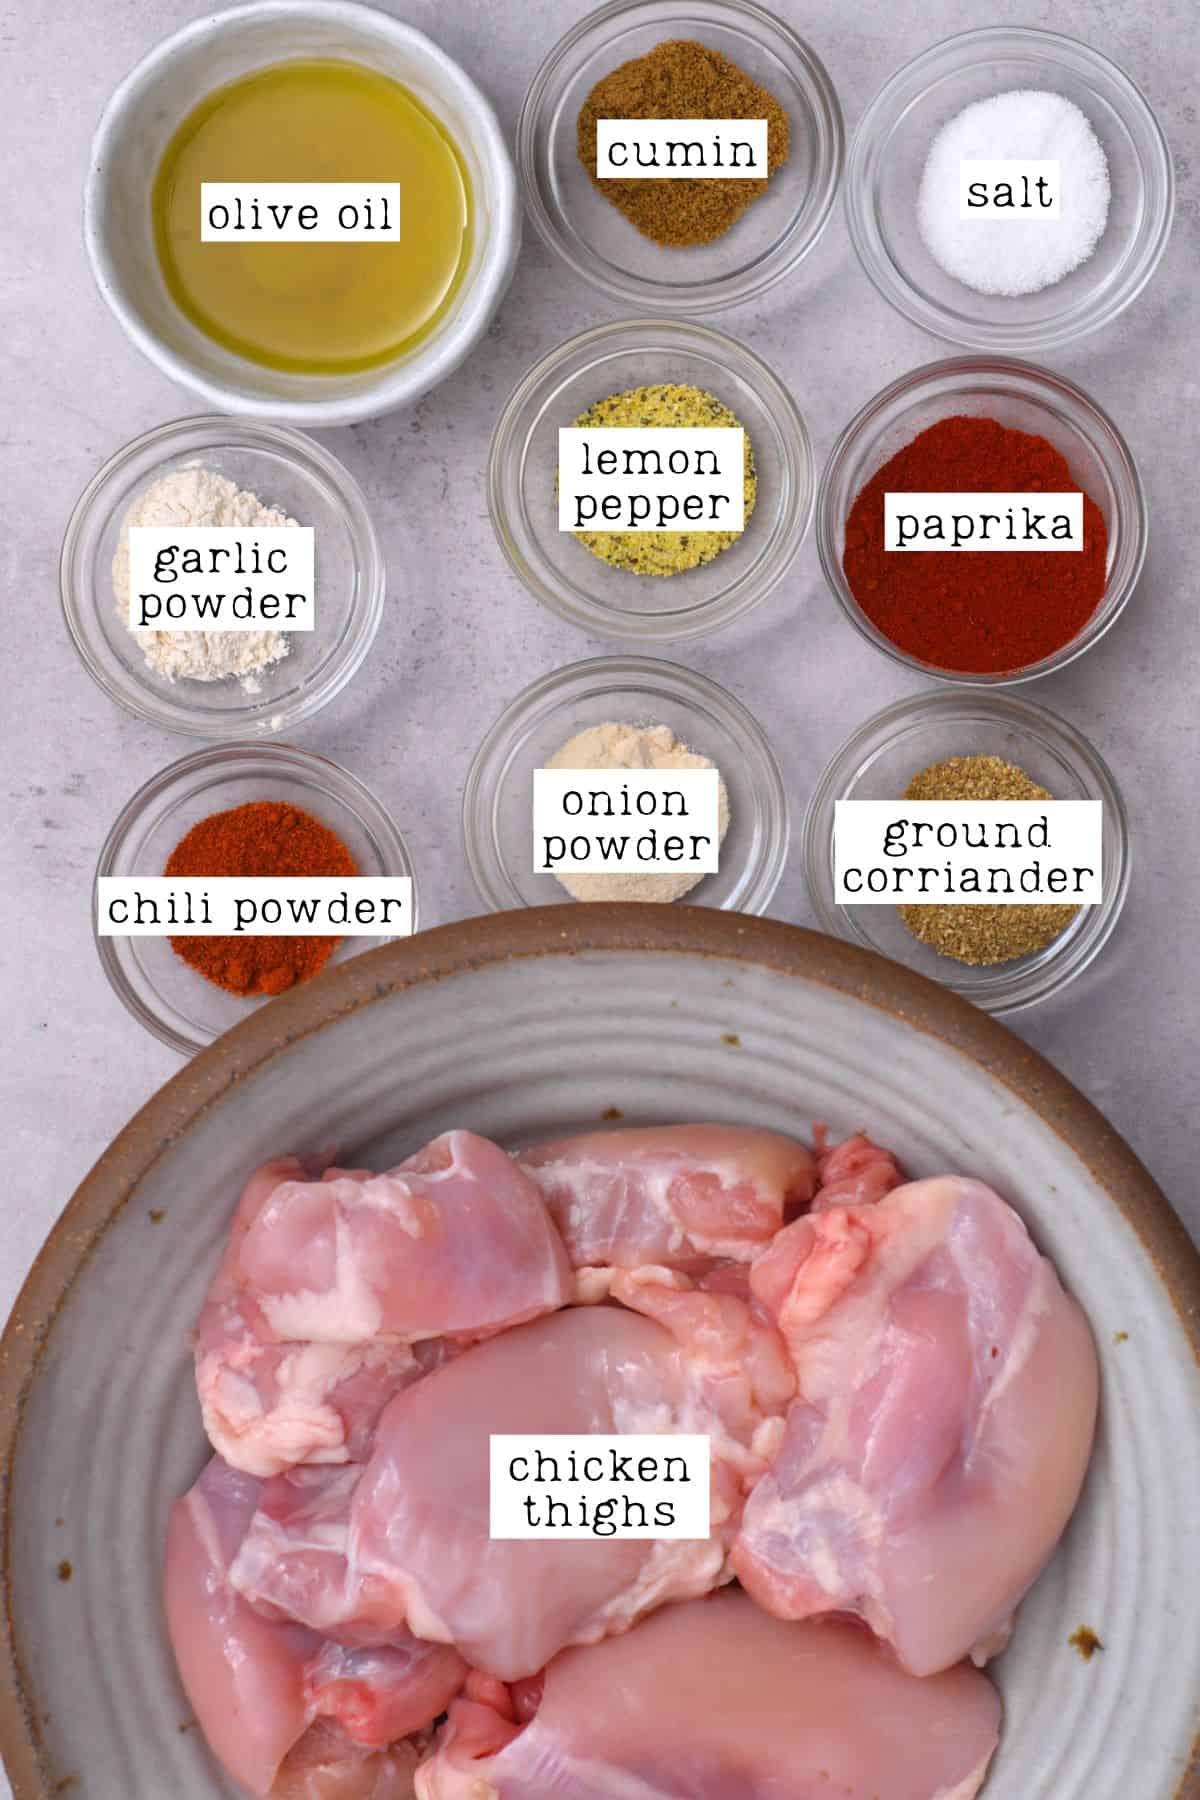 Ingredients for boneless chicken thighs to use in tacos